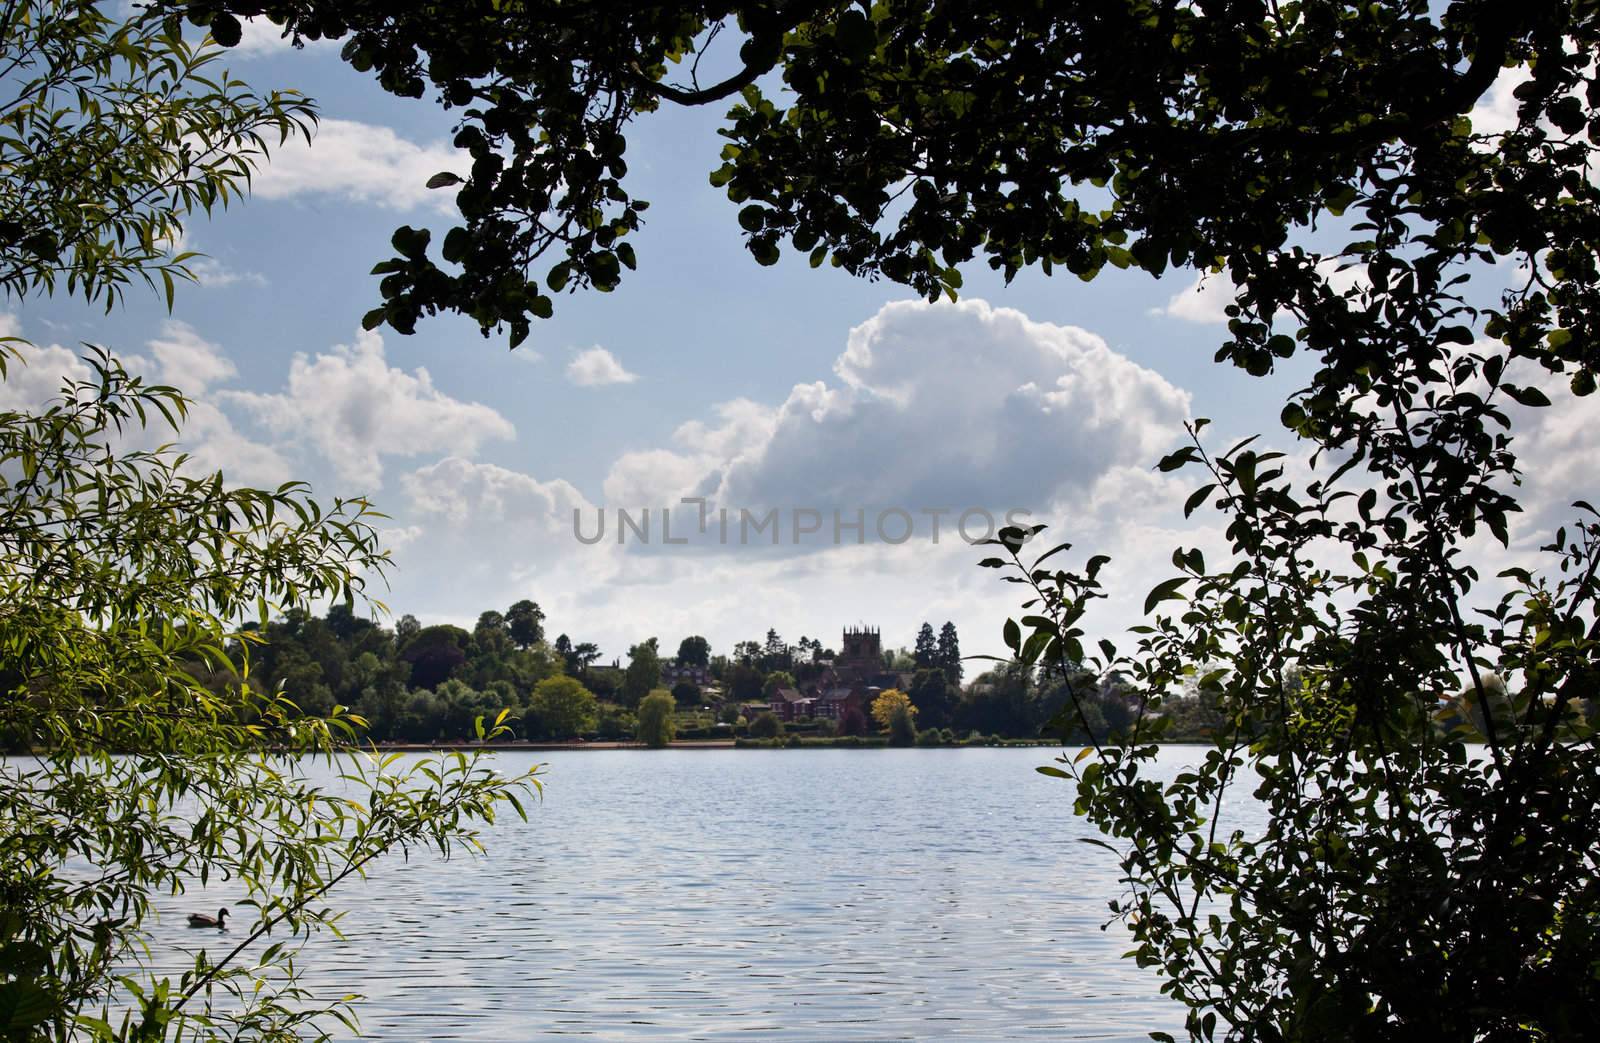 Ellesmere town and church framed by trees by steheap